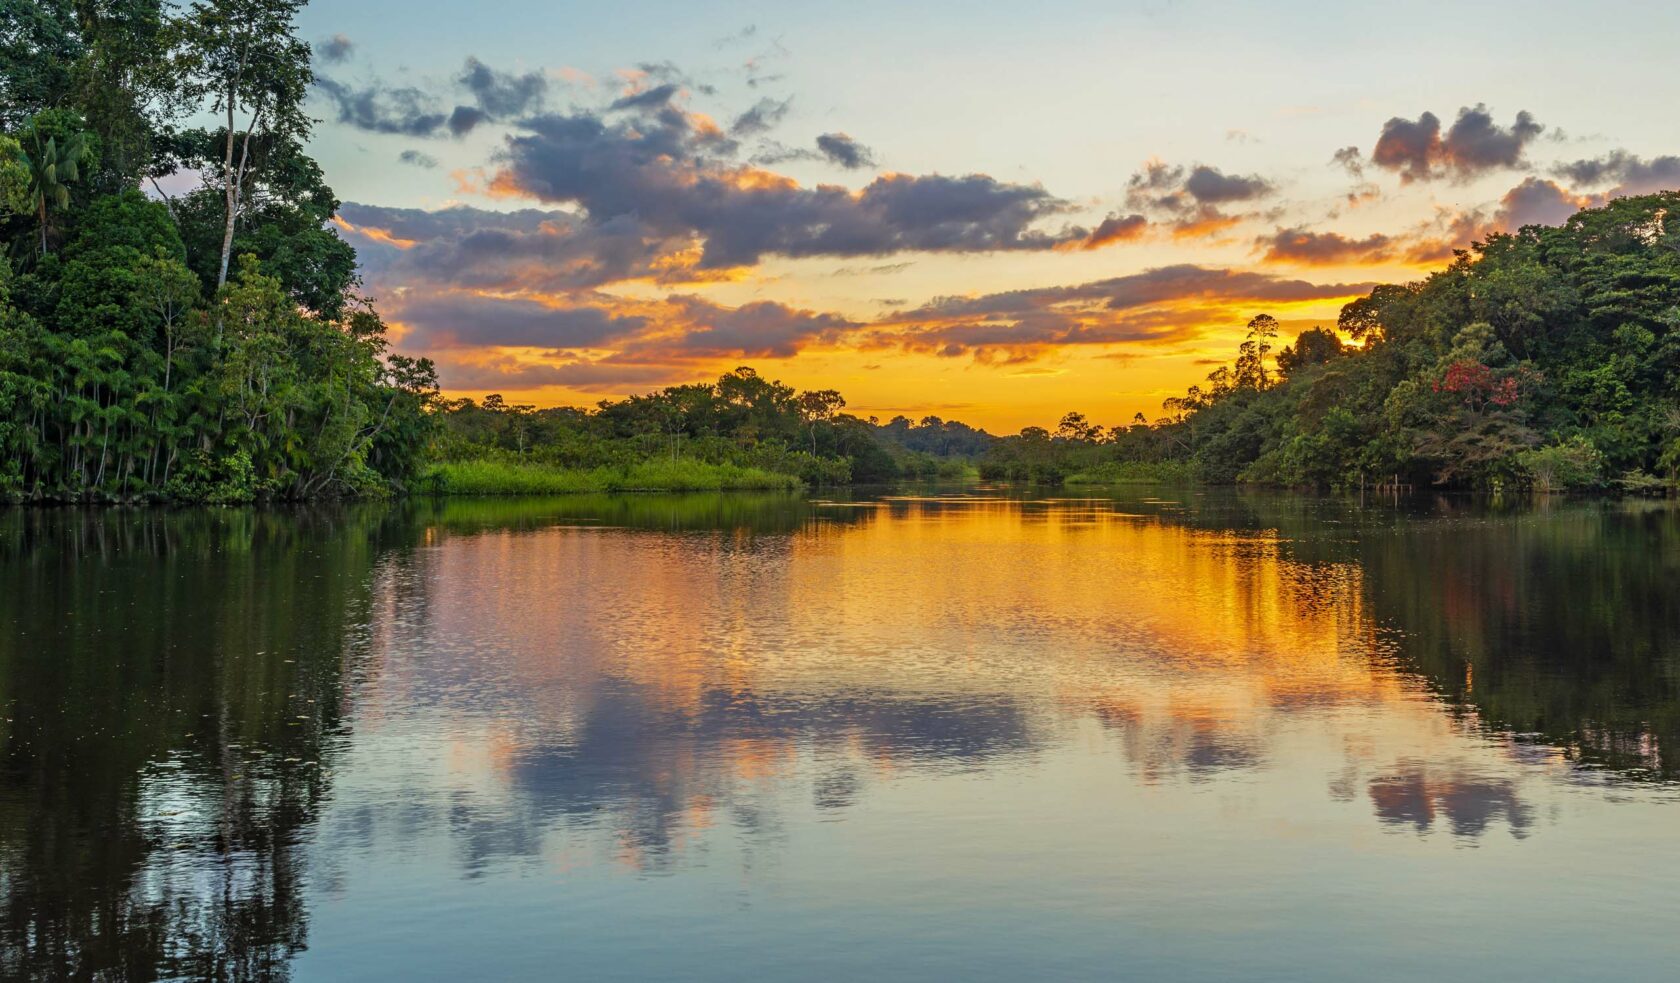 Reflection of a sunset by a lagoon inside the Amazon Rainforest Basin.